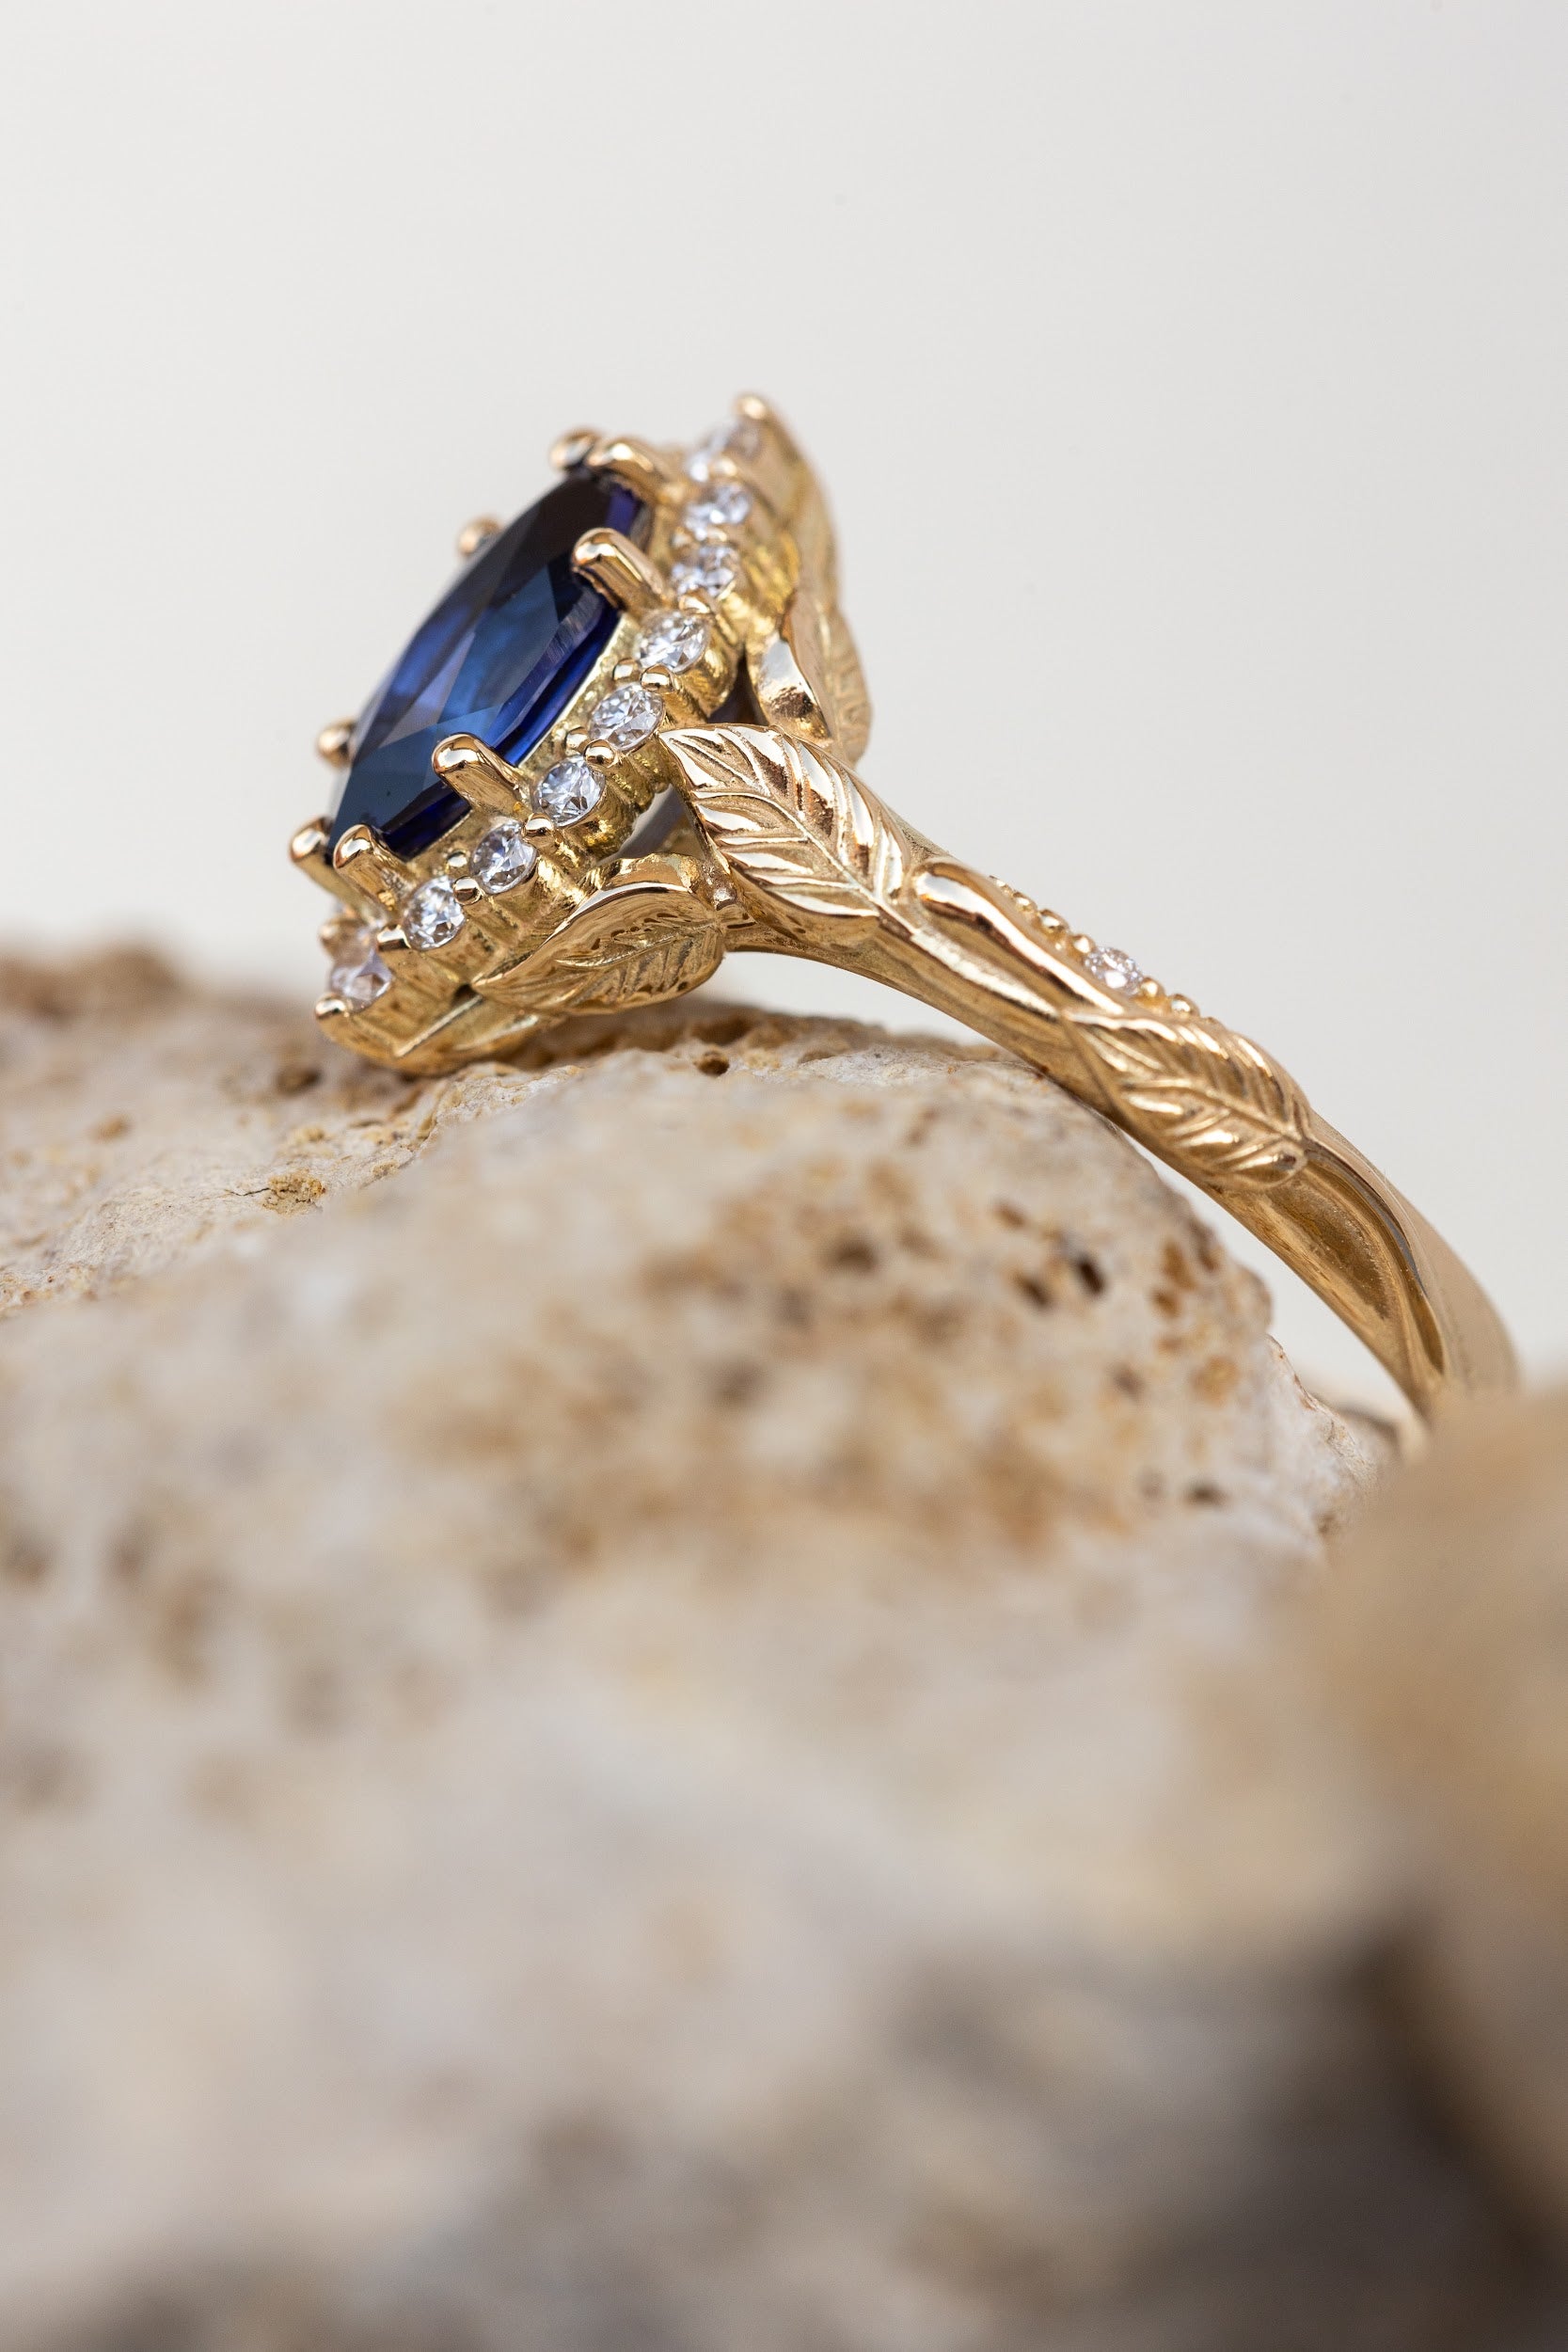 Dark blue lab sapphire engagement ring, gold proposal ring with marquise cut gemstone and diamond halo / Florentina